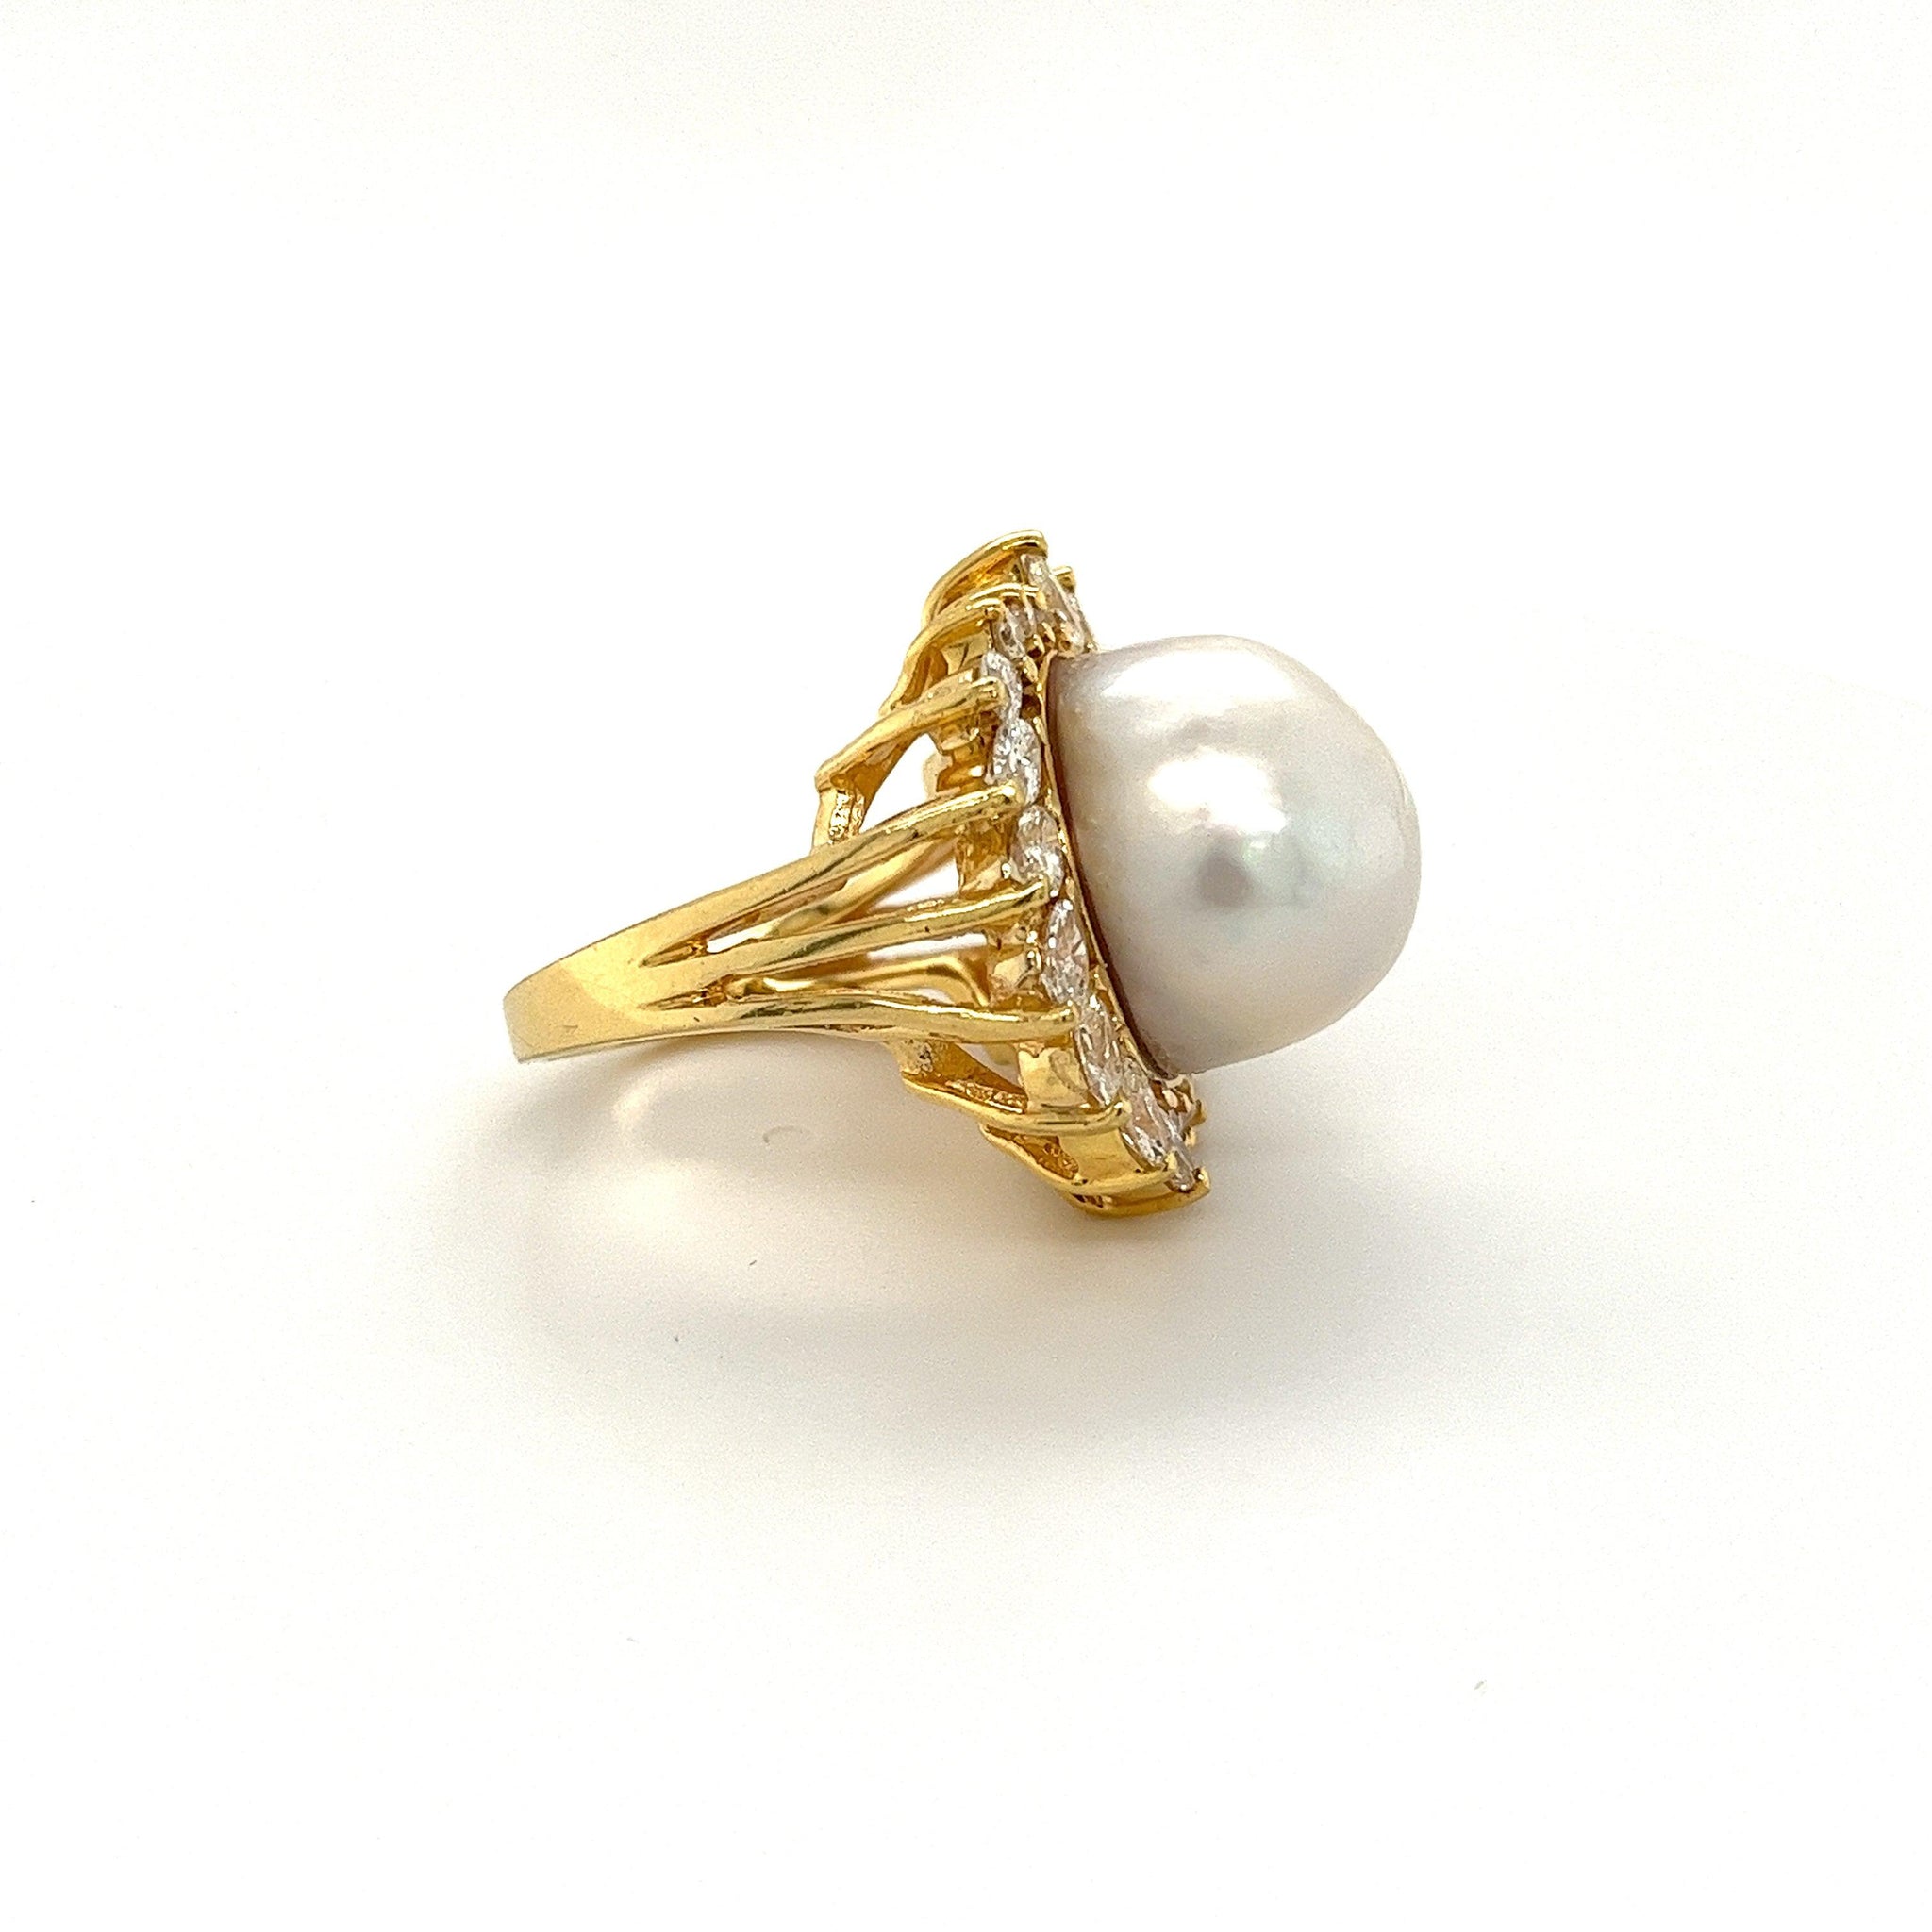 16mm South Sea Pearl and Marquise Cut Diamond Halo in 18k Gold Ring